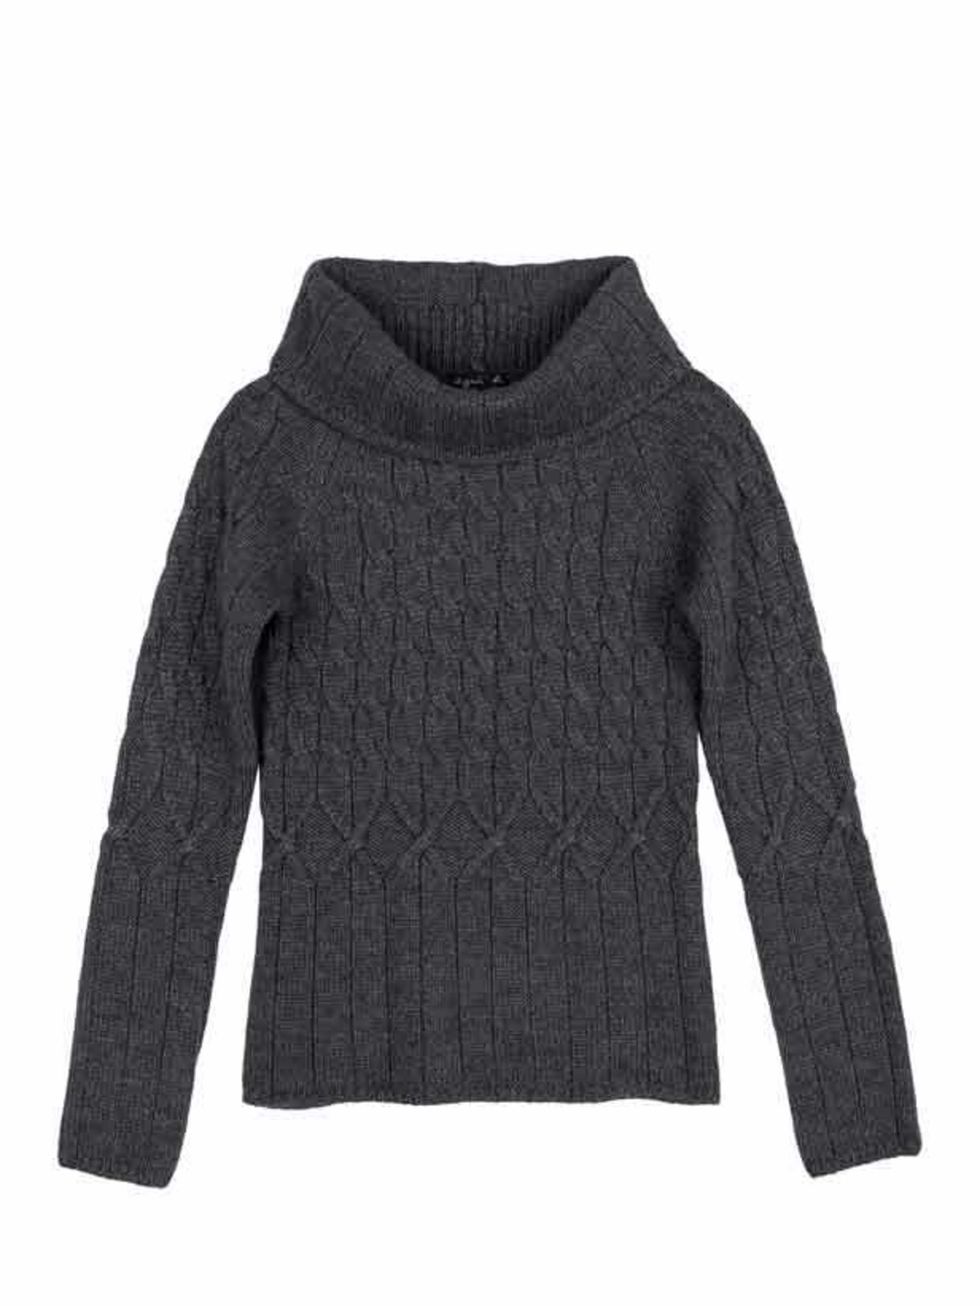 <p>Alpaca cable knit jumper, £210, by <a href="http://europe.agnesb.fr/en/shopping_online/product/woman-1/knitwear/pull-over-niels/808">Agnes b </a></p>